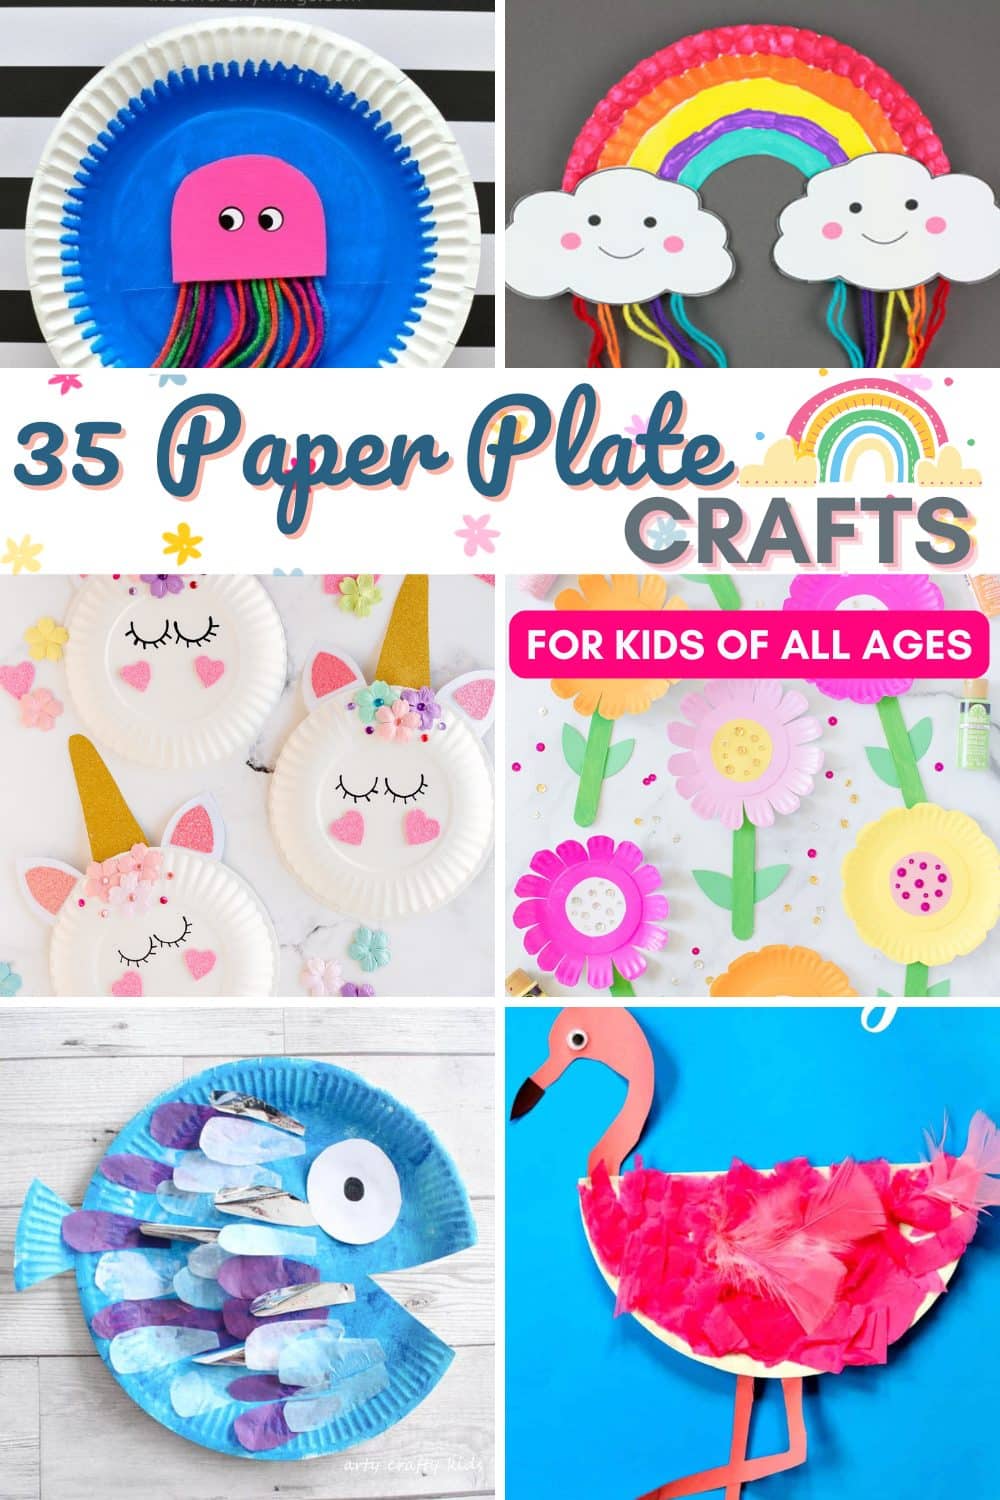 Easy Paper Plate Craft Ideas featuring rainbows, unicorns and flowers